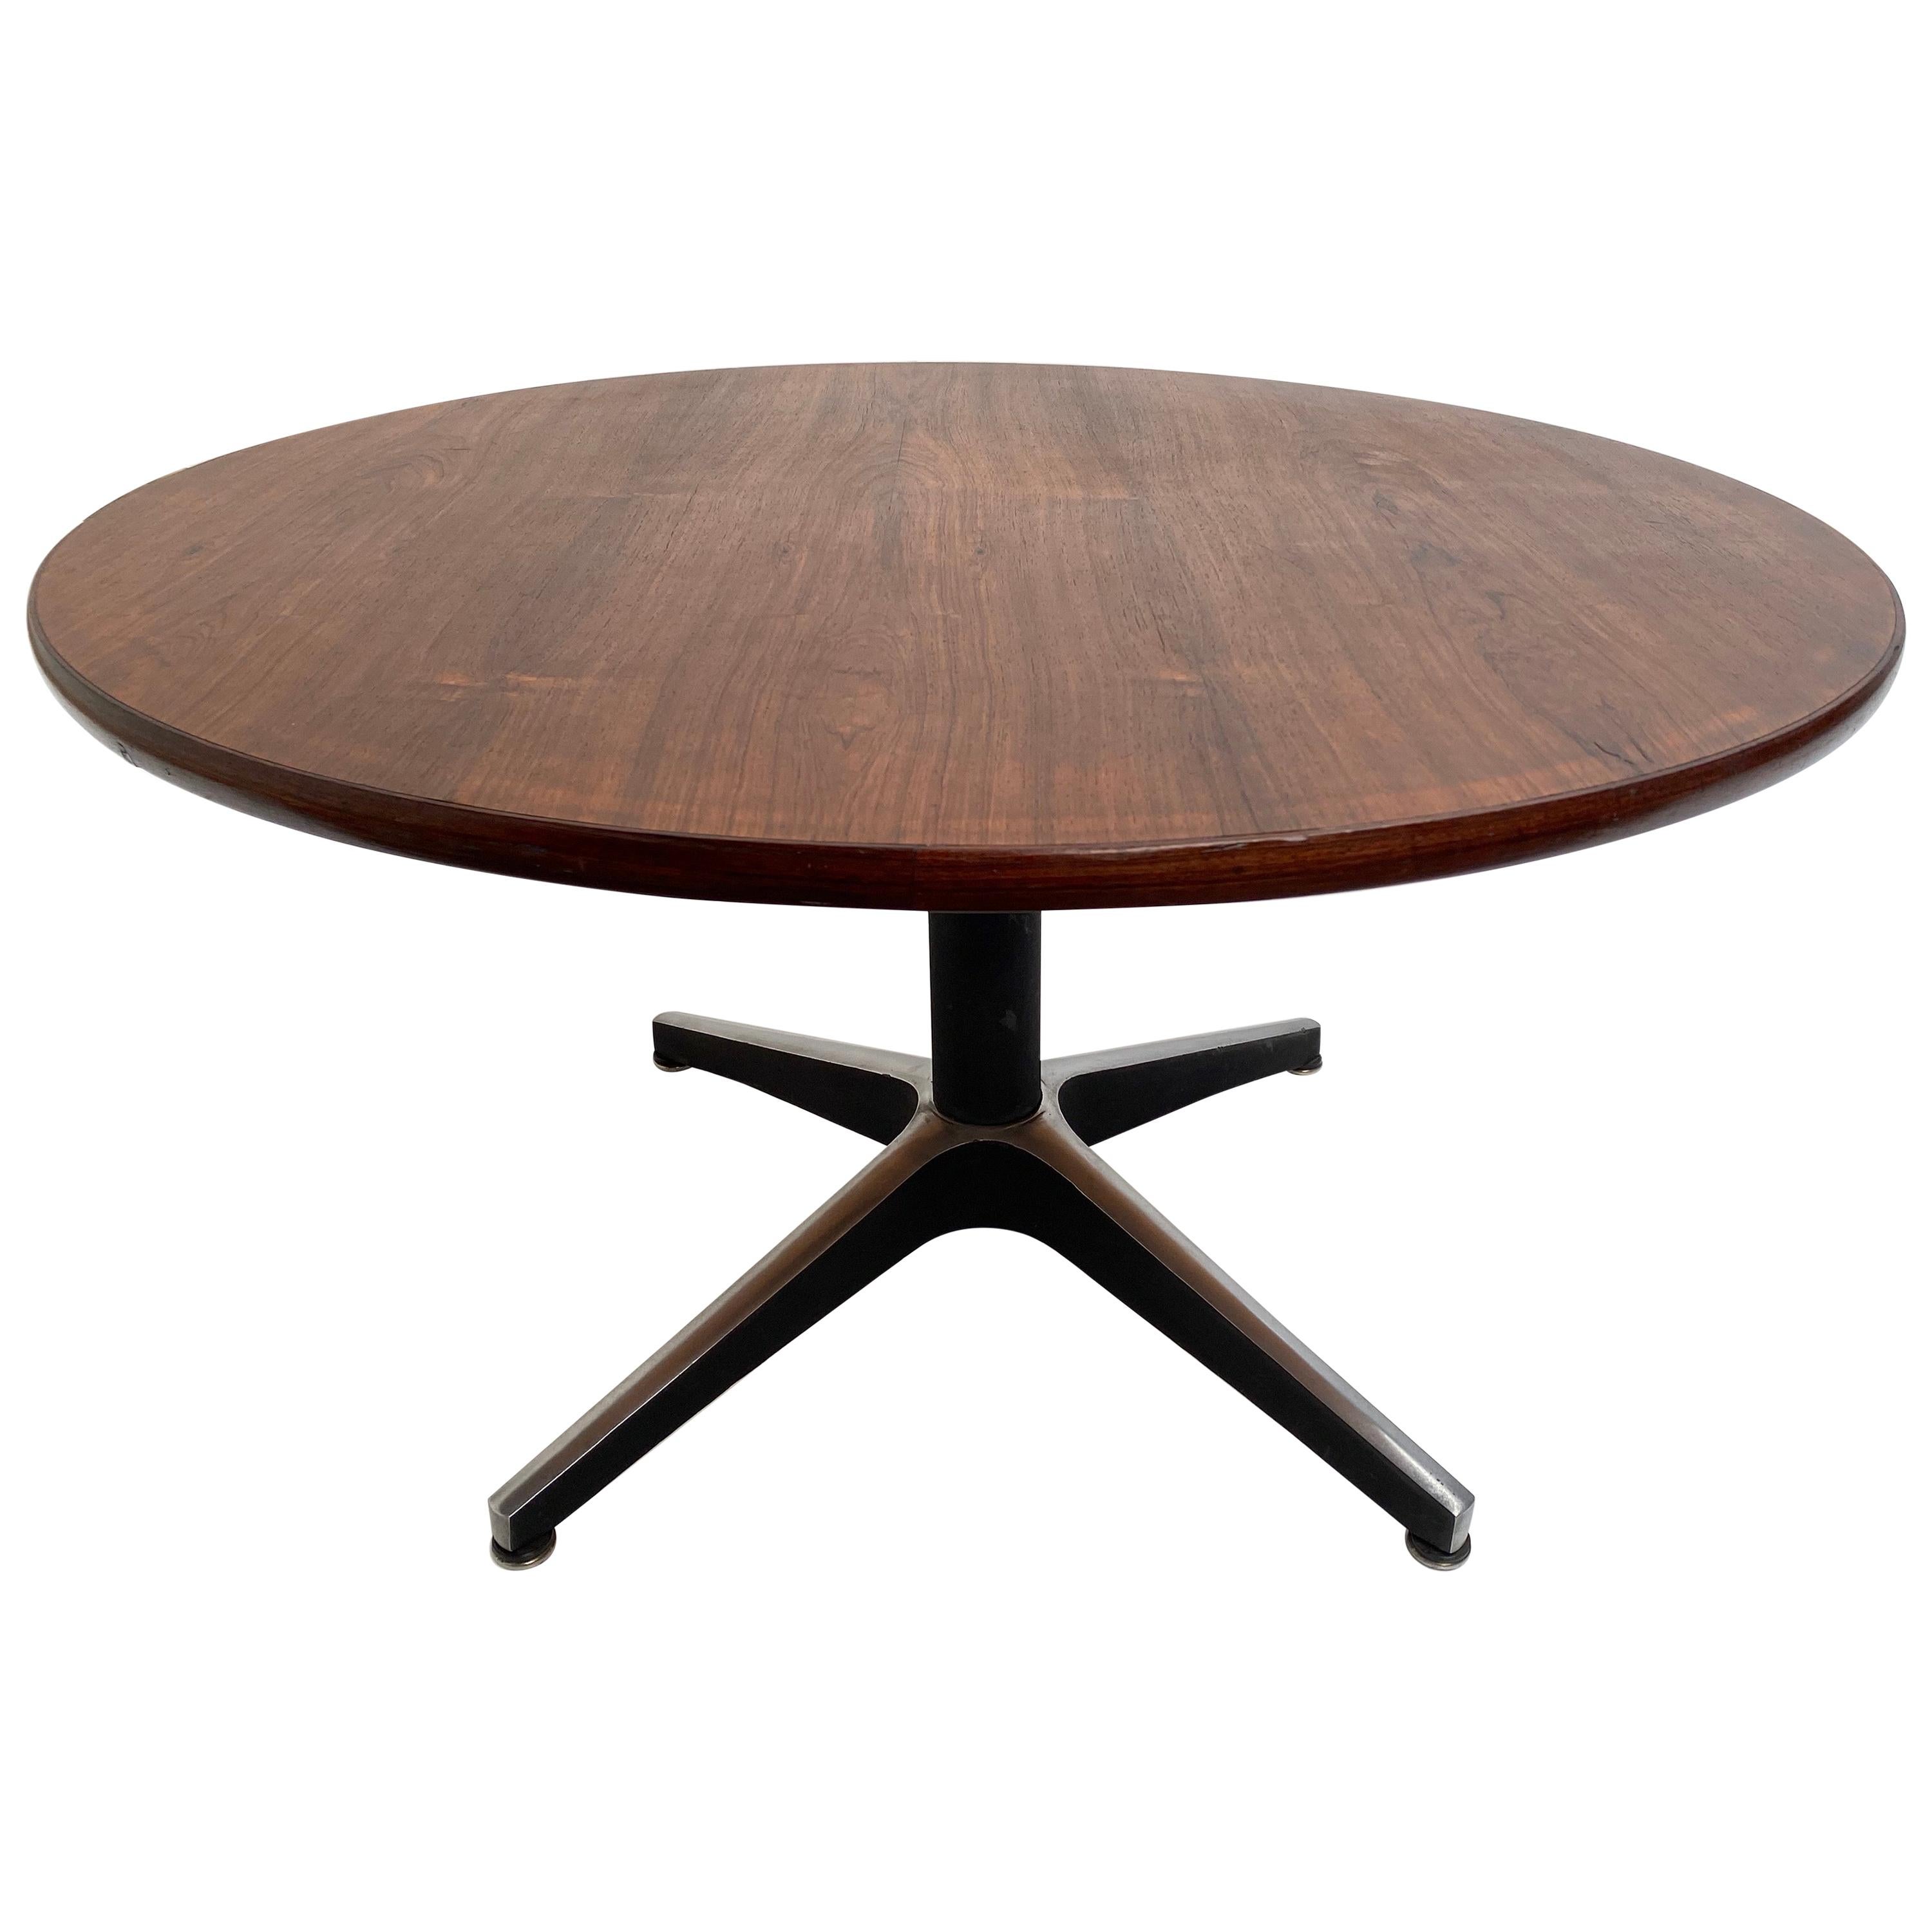 Campo & Graffi Adjustable Height Dining Table, 1959, Both Signed and Published